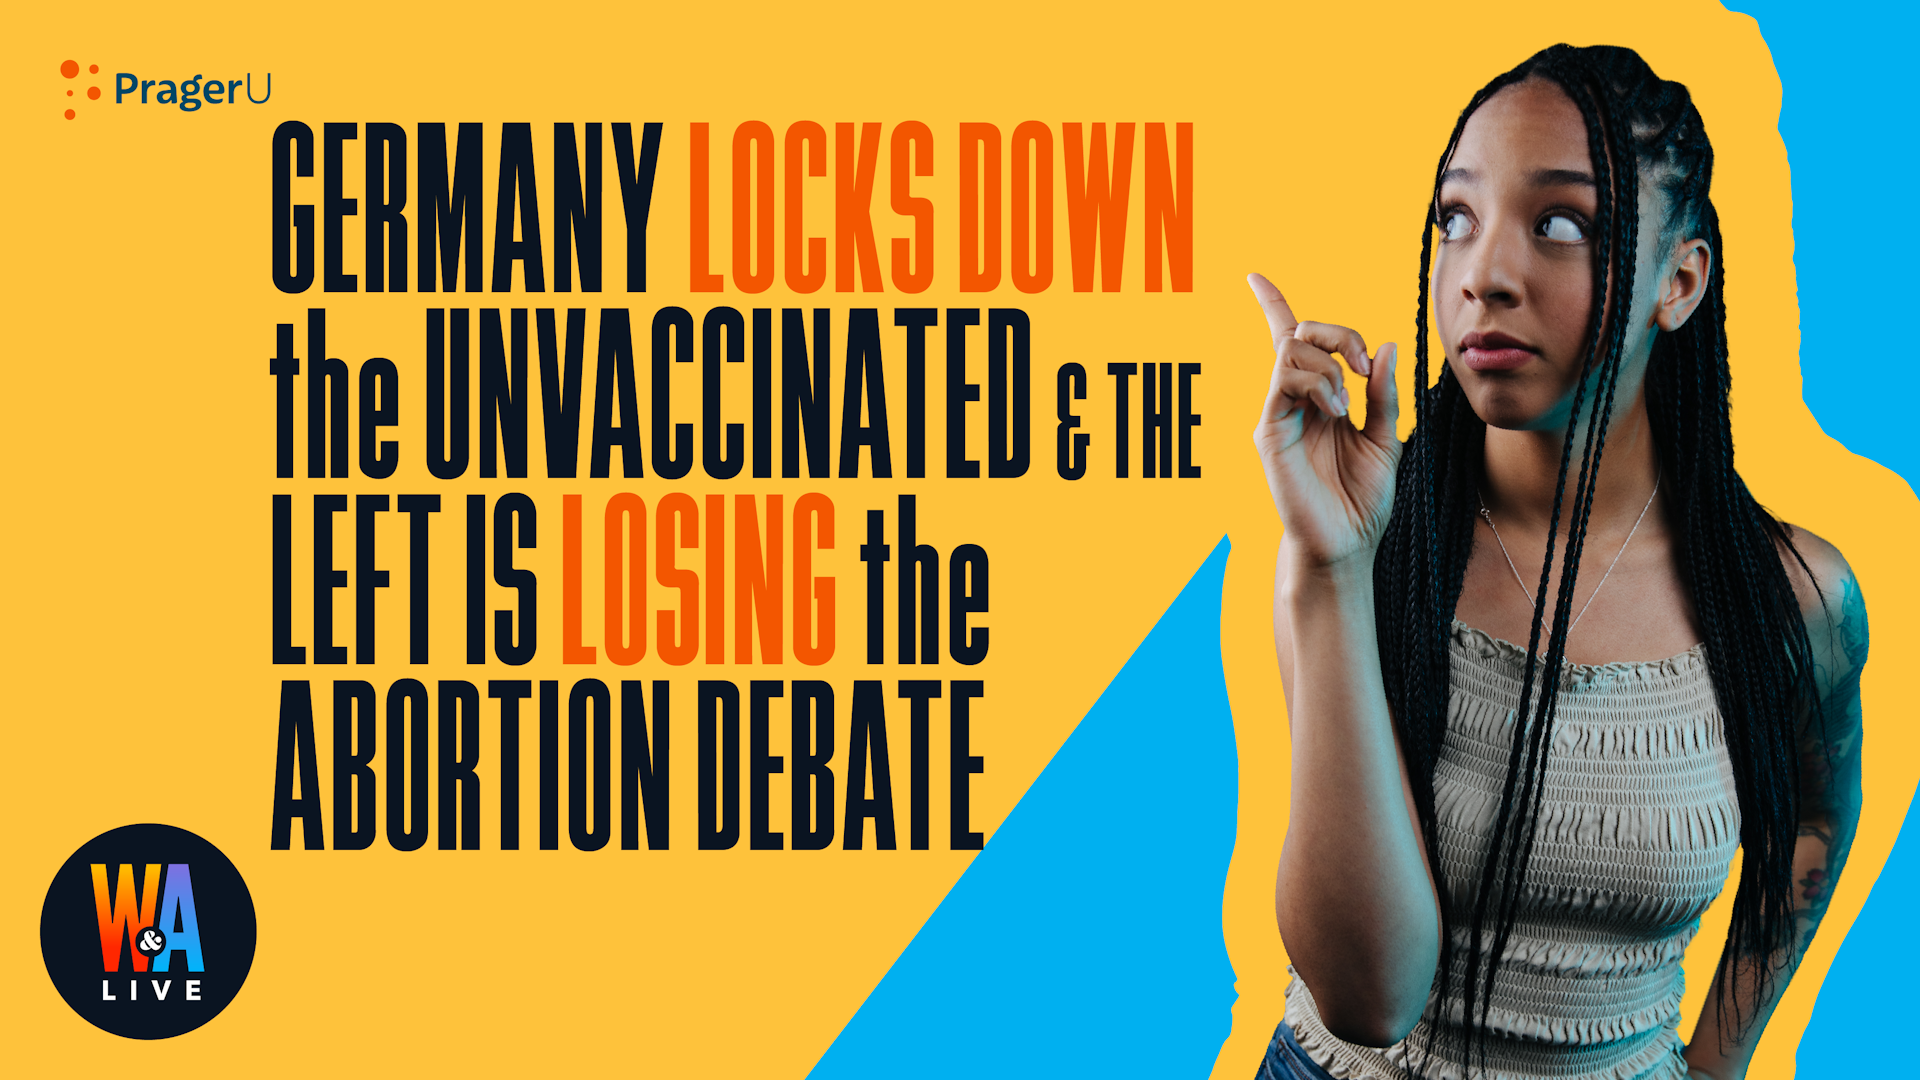 Germany Locks Down the Unvaccinated and the Left is Losing the Abortion Debate